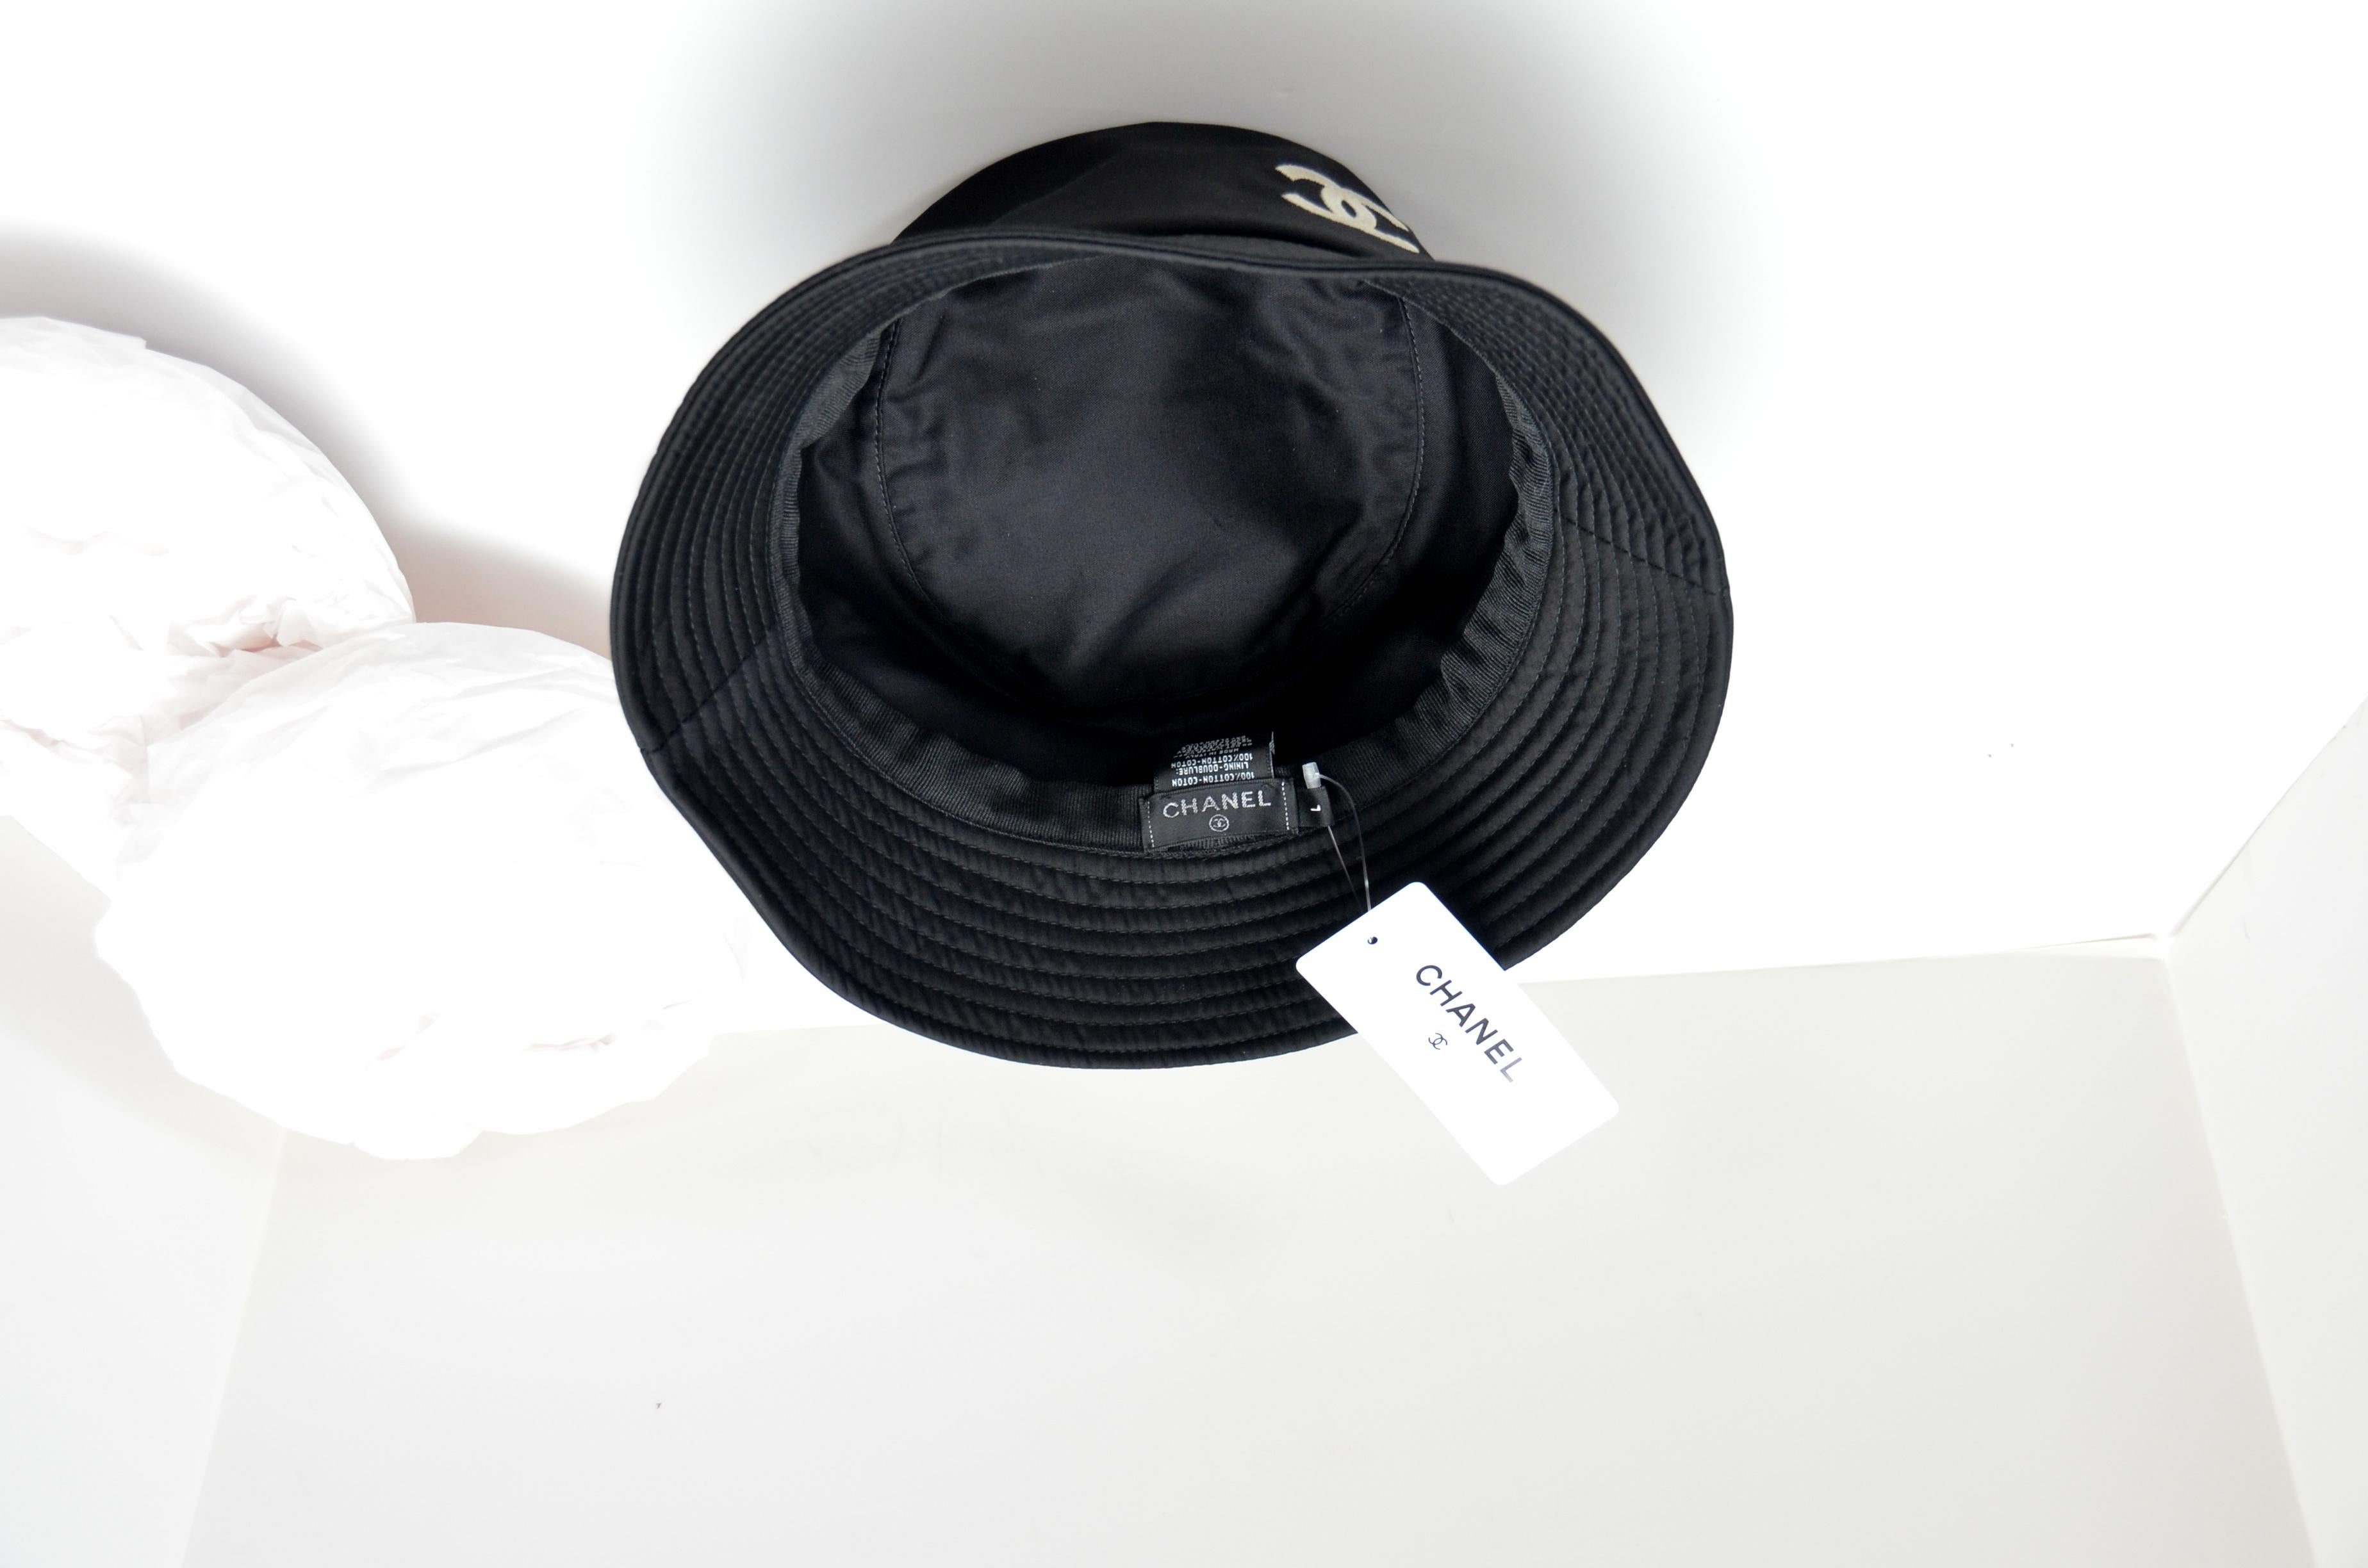 100% authentic guaranteed Chanel black bucket hat.
New with tags
Size Large

FINAL SALE